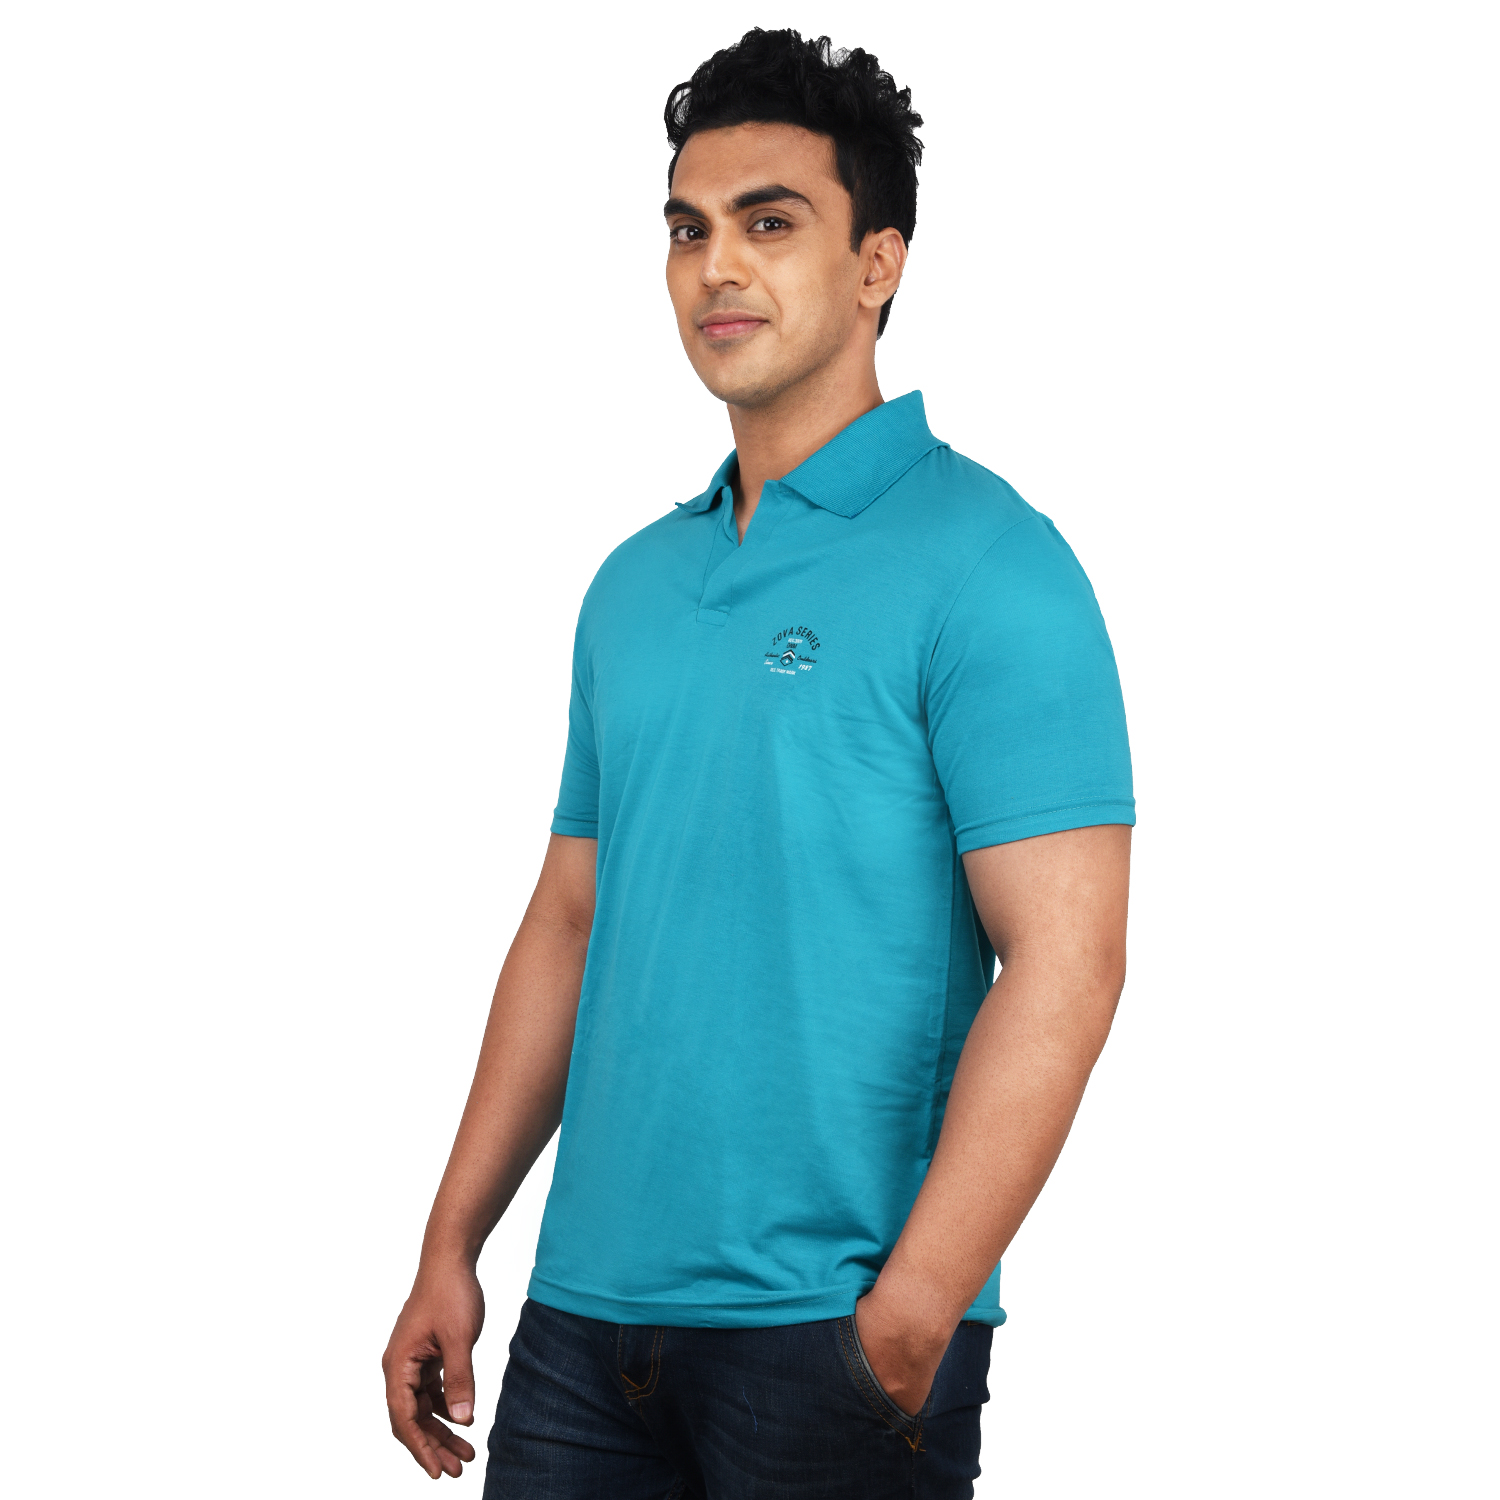 Buy ZOVA T SHIRT 1PC Online @ ₹299 from ShopClues